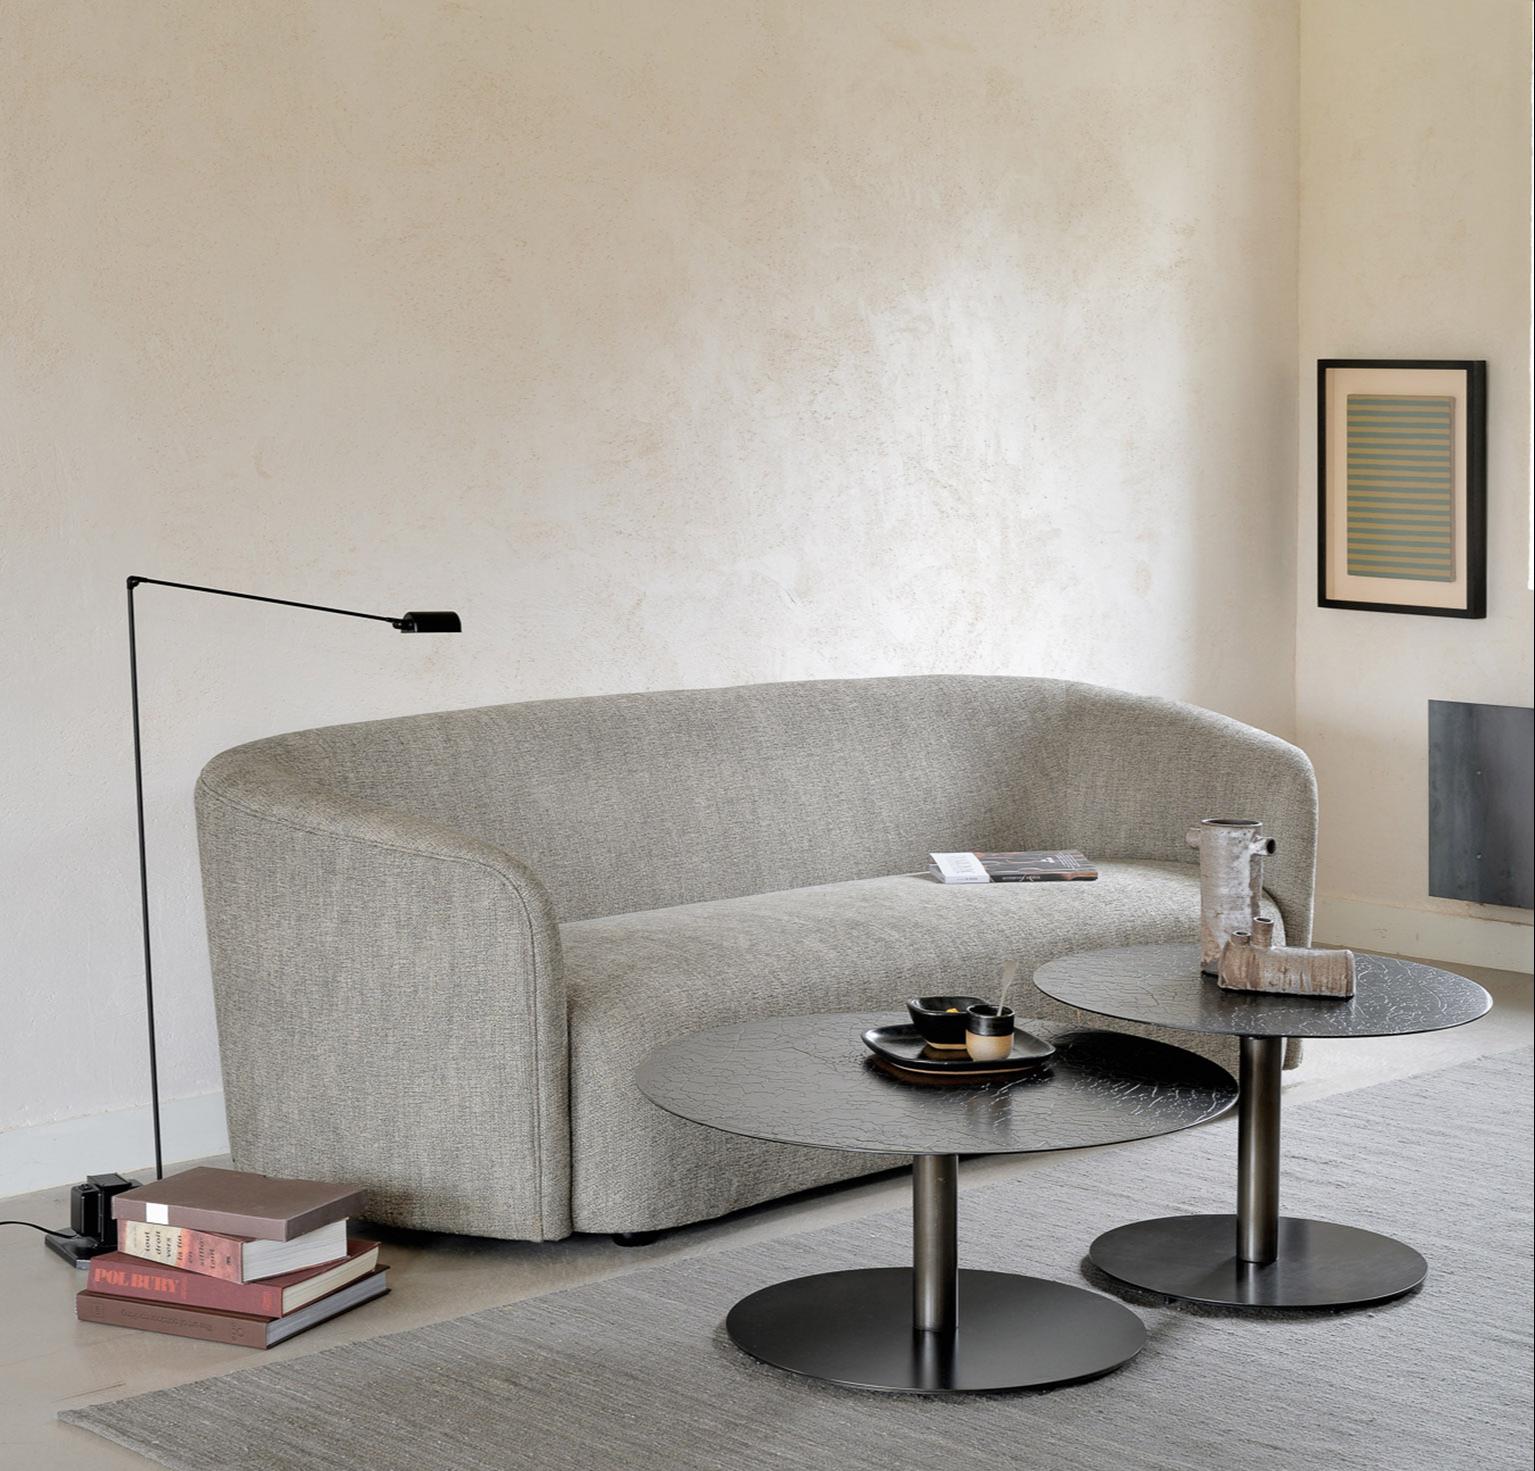 Ellipse sofa and Sphere coffee tables | Live Light